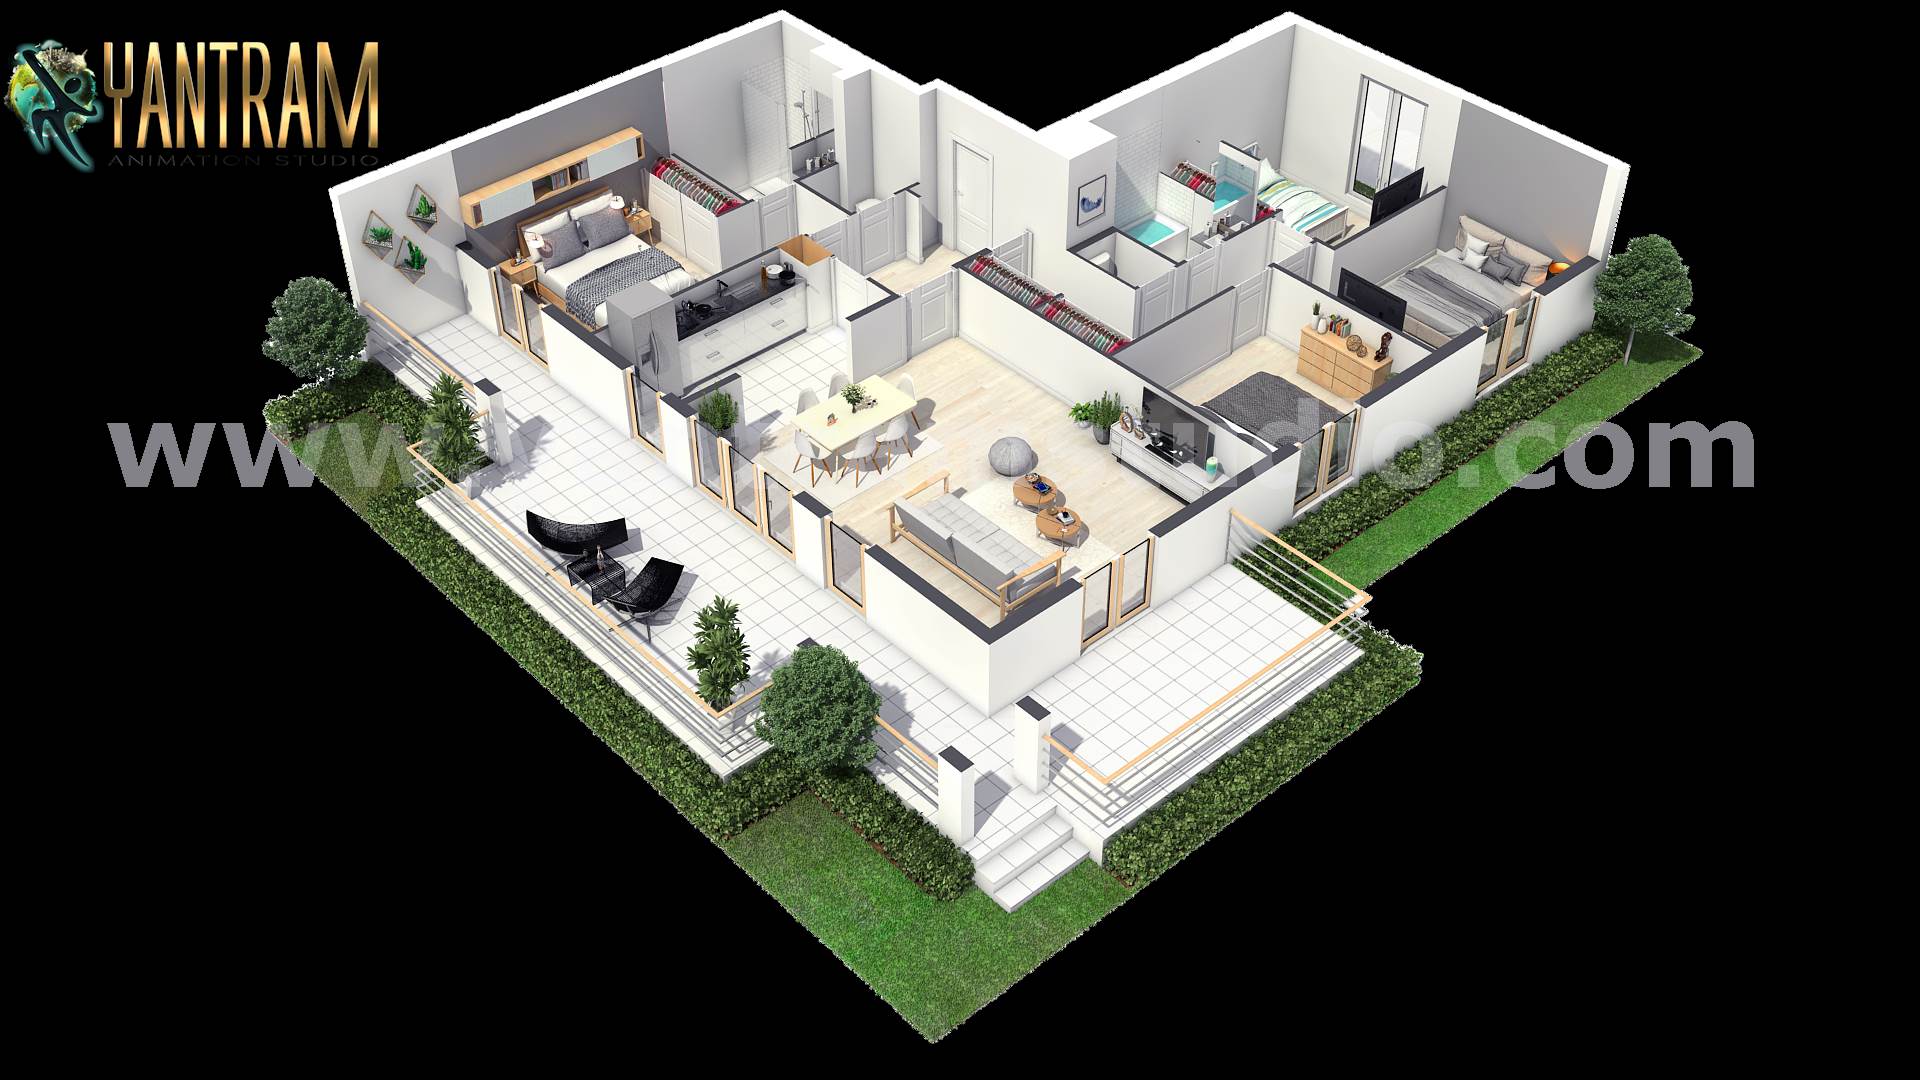 modern_house_3d_floor_plan_rendering_services_with_lendscaping_concept_by_architectural_modeling_firms.png -  by Yantramarchitecturaldesignstudio